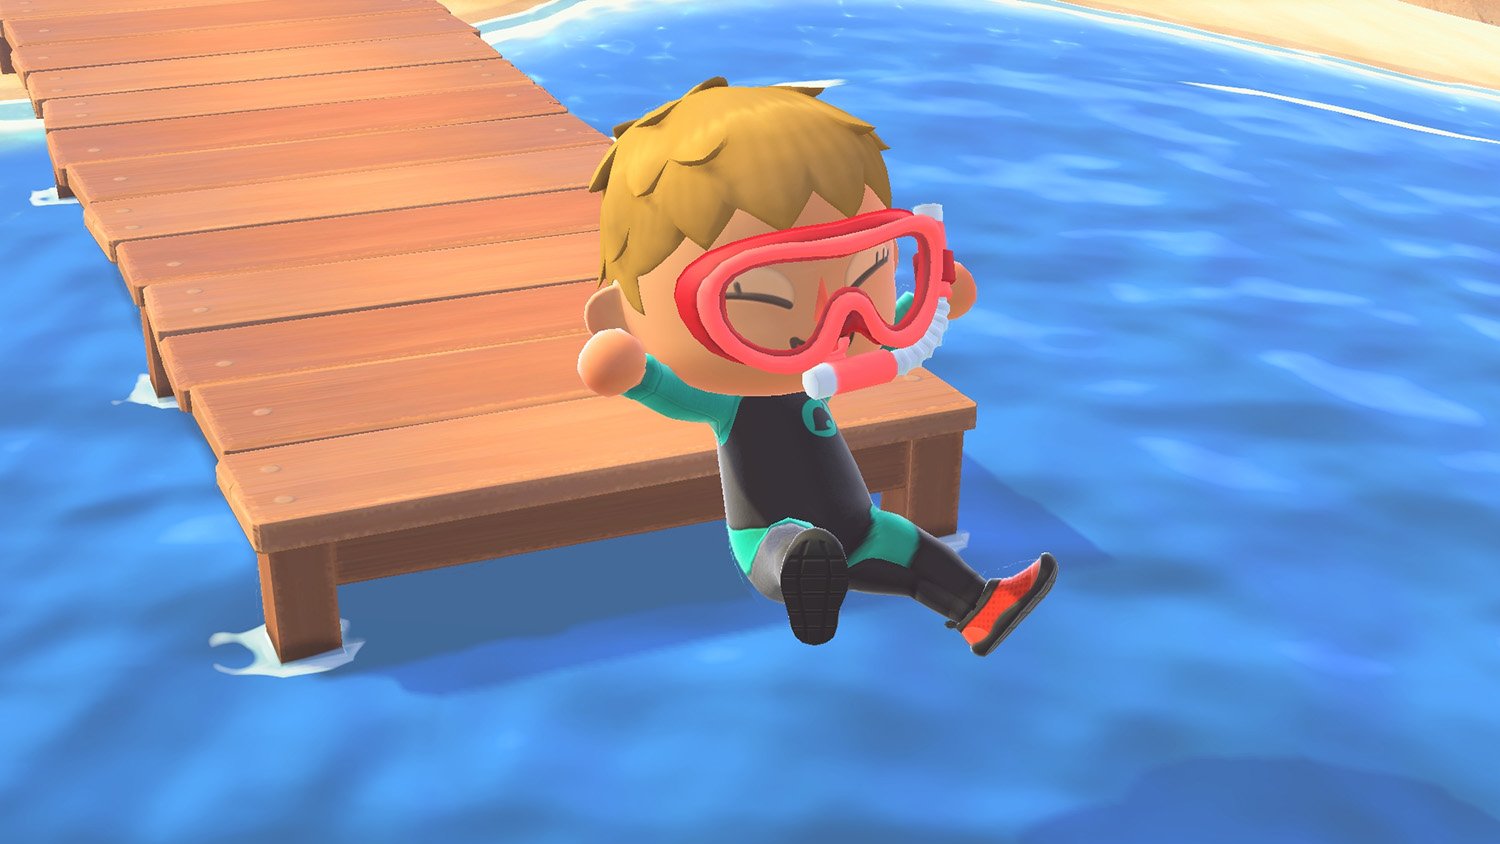 Animal Crossing: New Horizons character jumps into the ocean as part of a June update